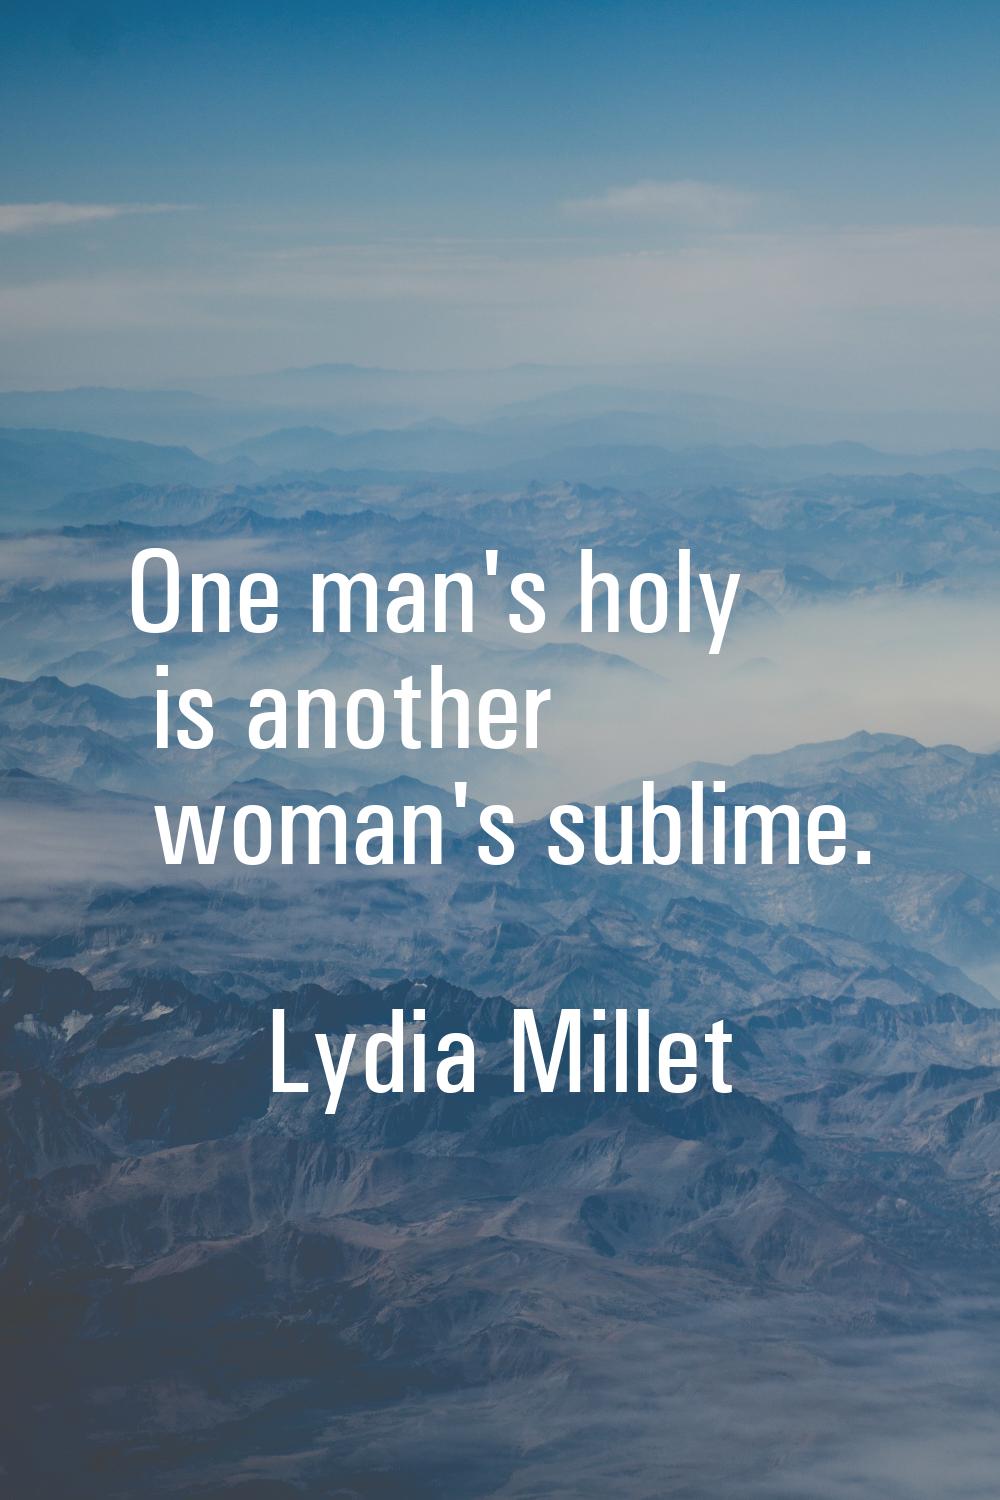 One man's holy is another woman's sublime.